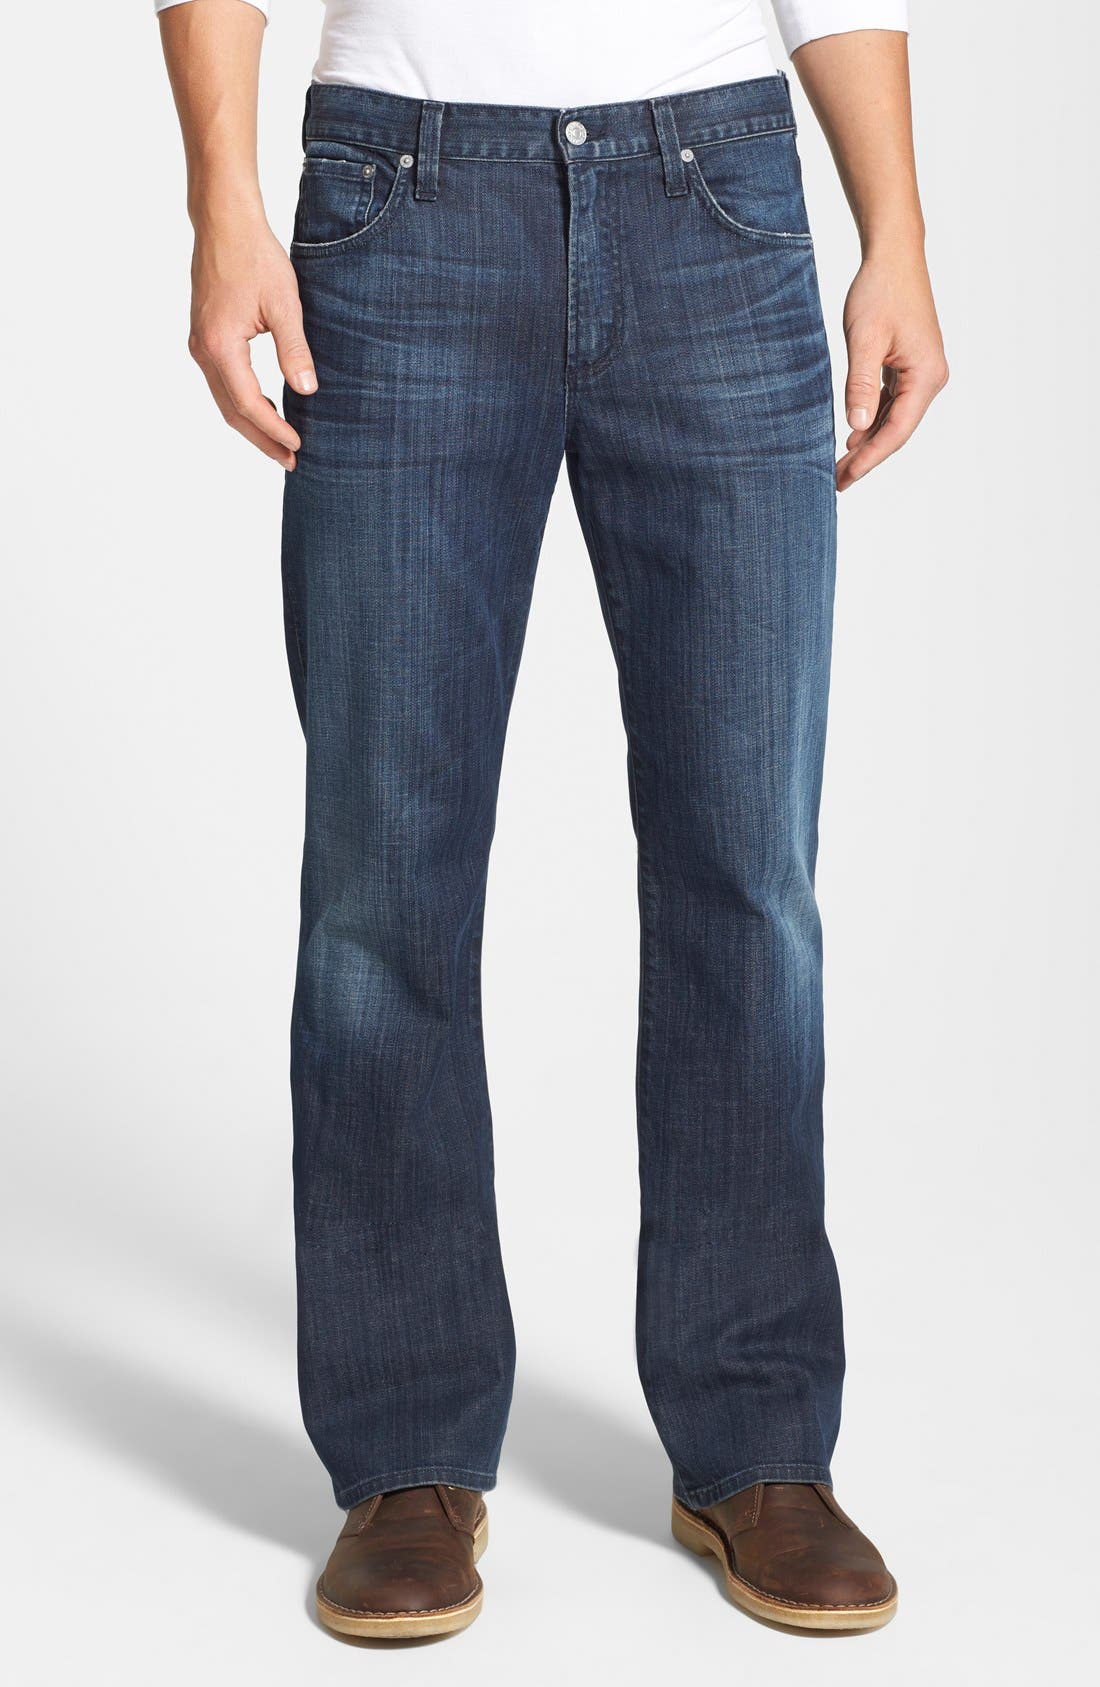 citizens of humanity bootcut